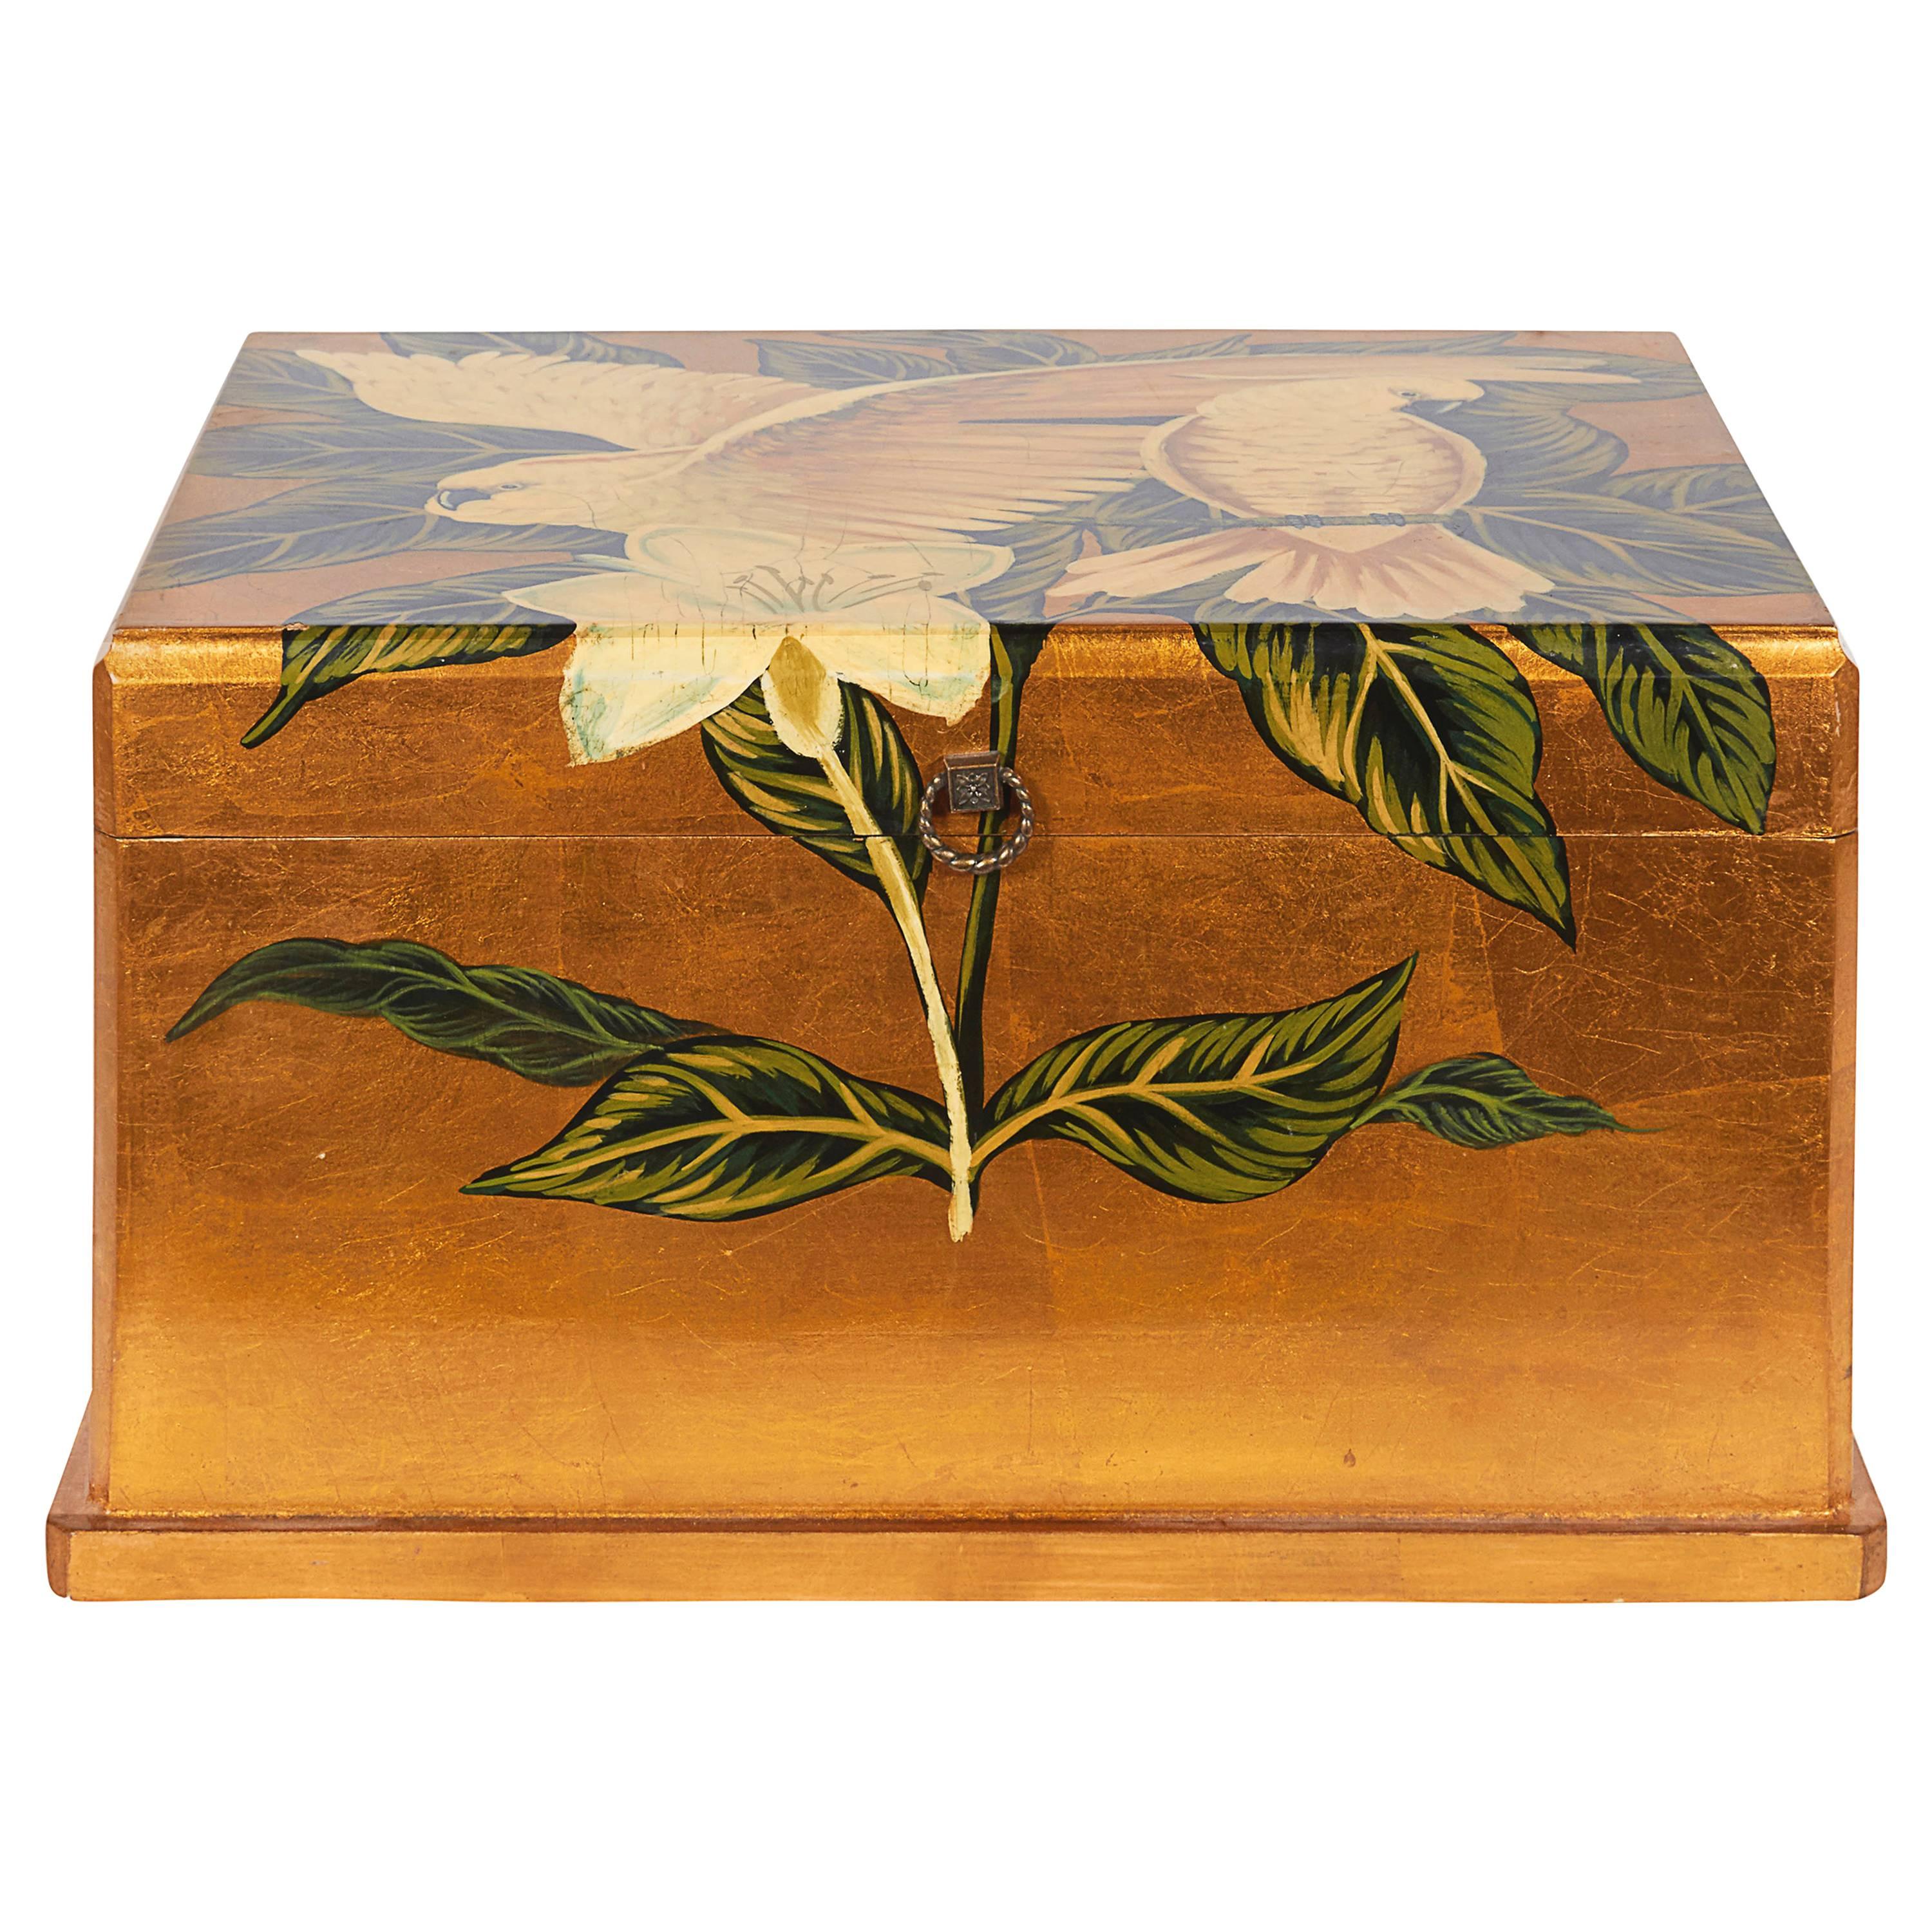 Hand-Painted Gold Leaf Jewelry Box with Cockatoos